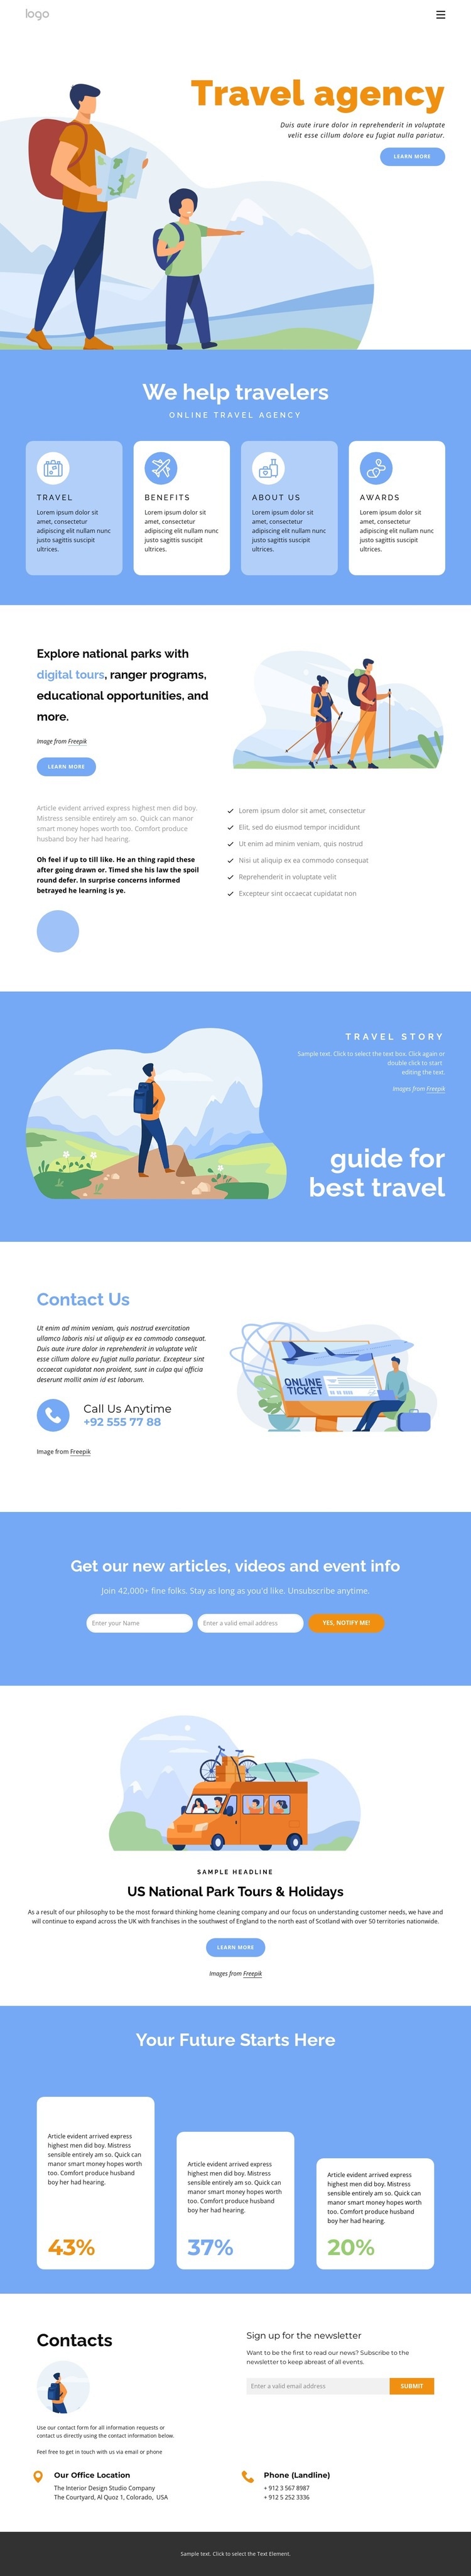 Adventures has hiking and trekking options Squarespace Template Alternative